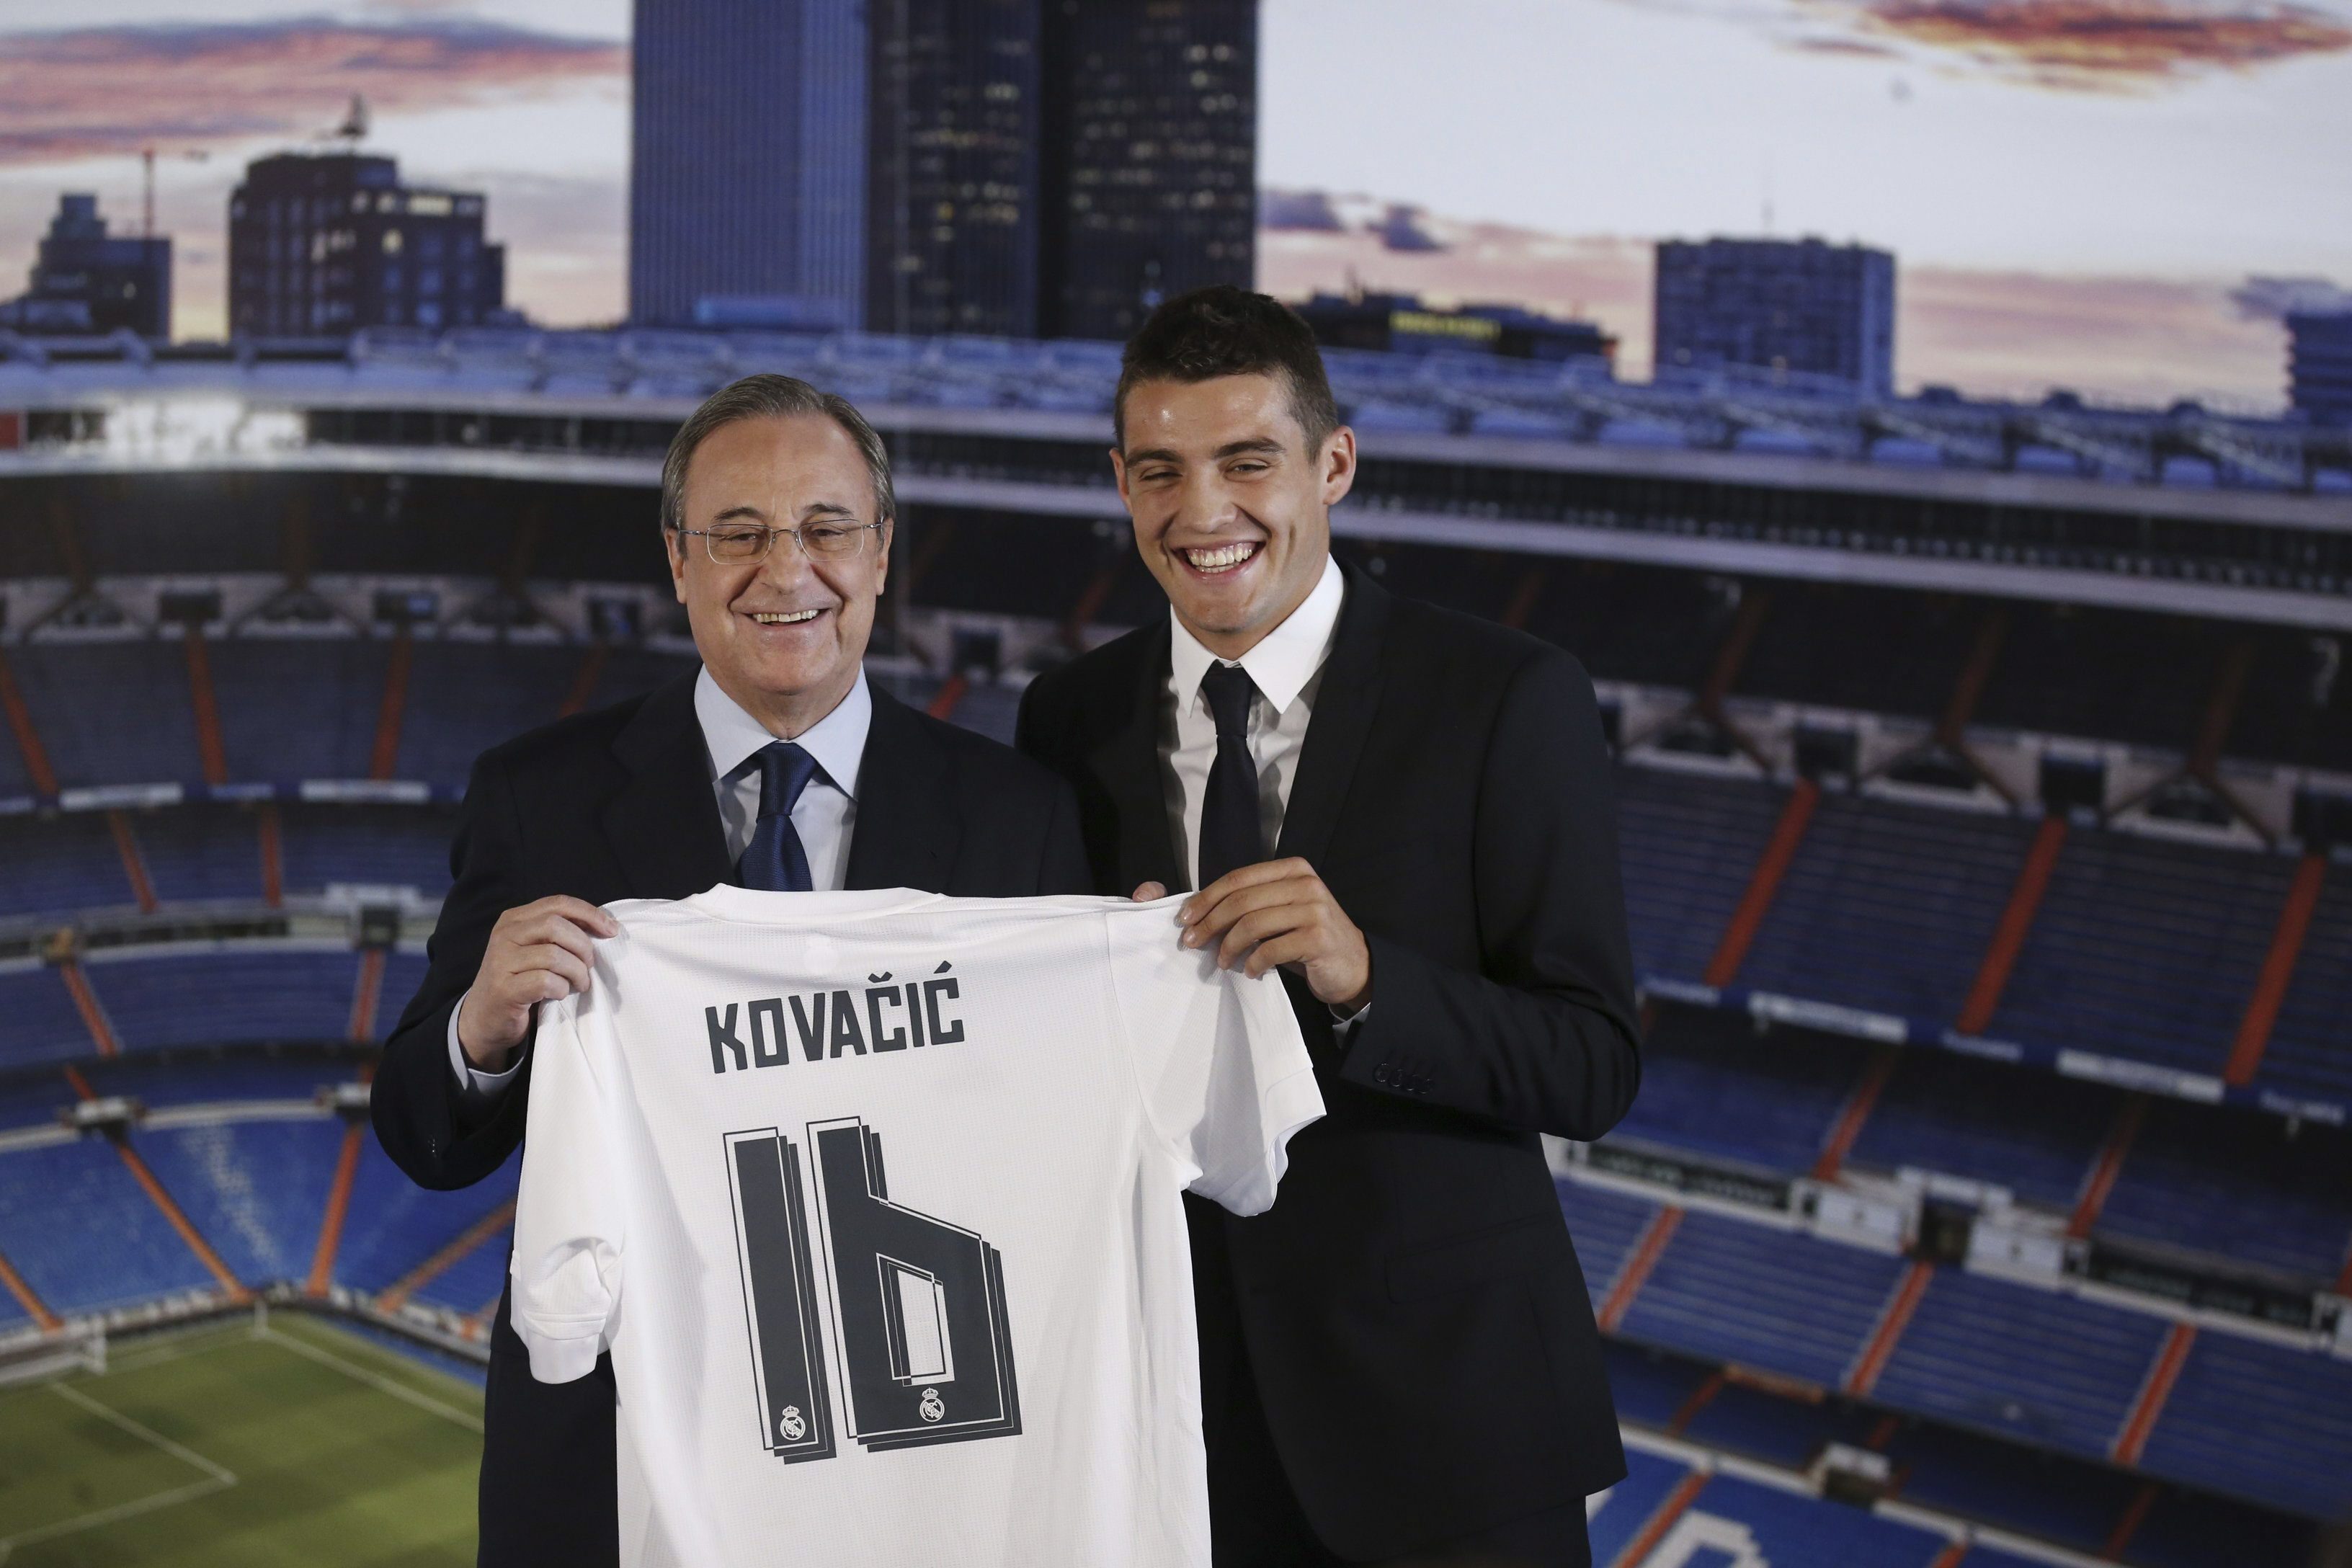 Kovacic has disappointed his admirers in his performances in the Madrid shirt and will be looking to redeem himself this coming season despite reports linking him to a move away from the Santiago Bernabeu. (Picture Courtesy - AFP/Getty Images)